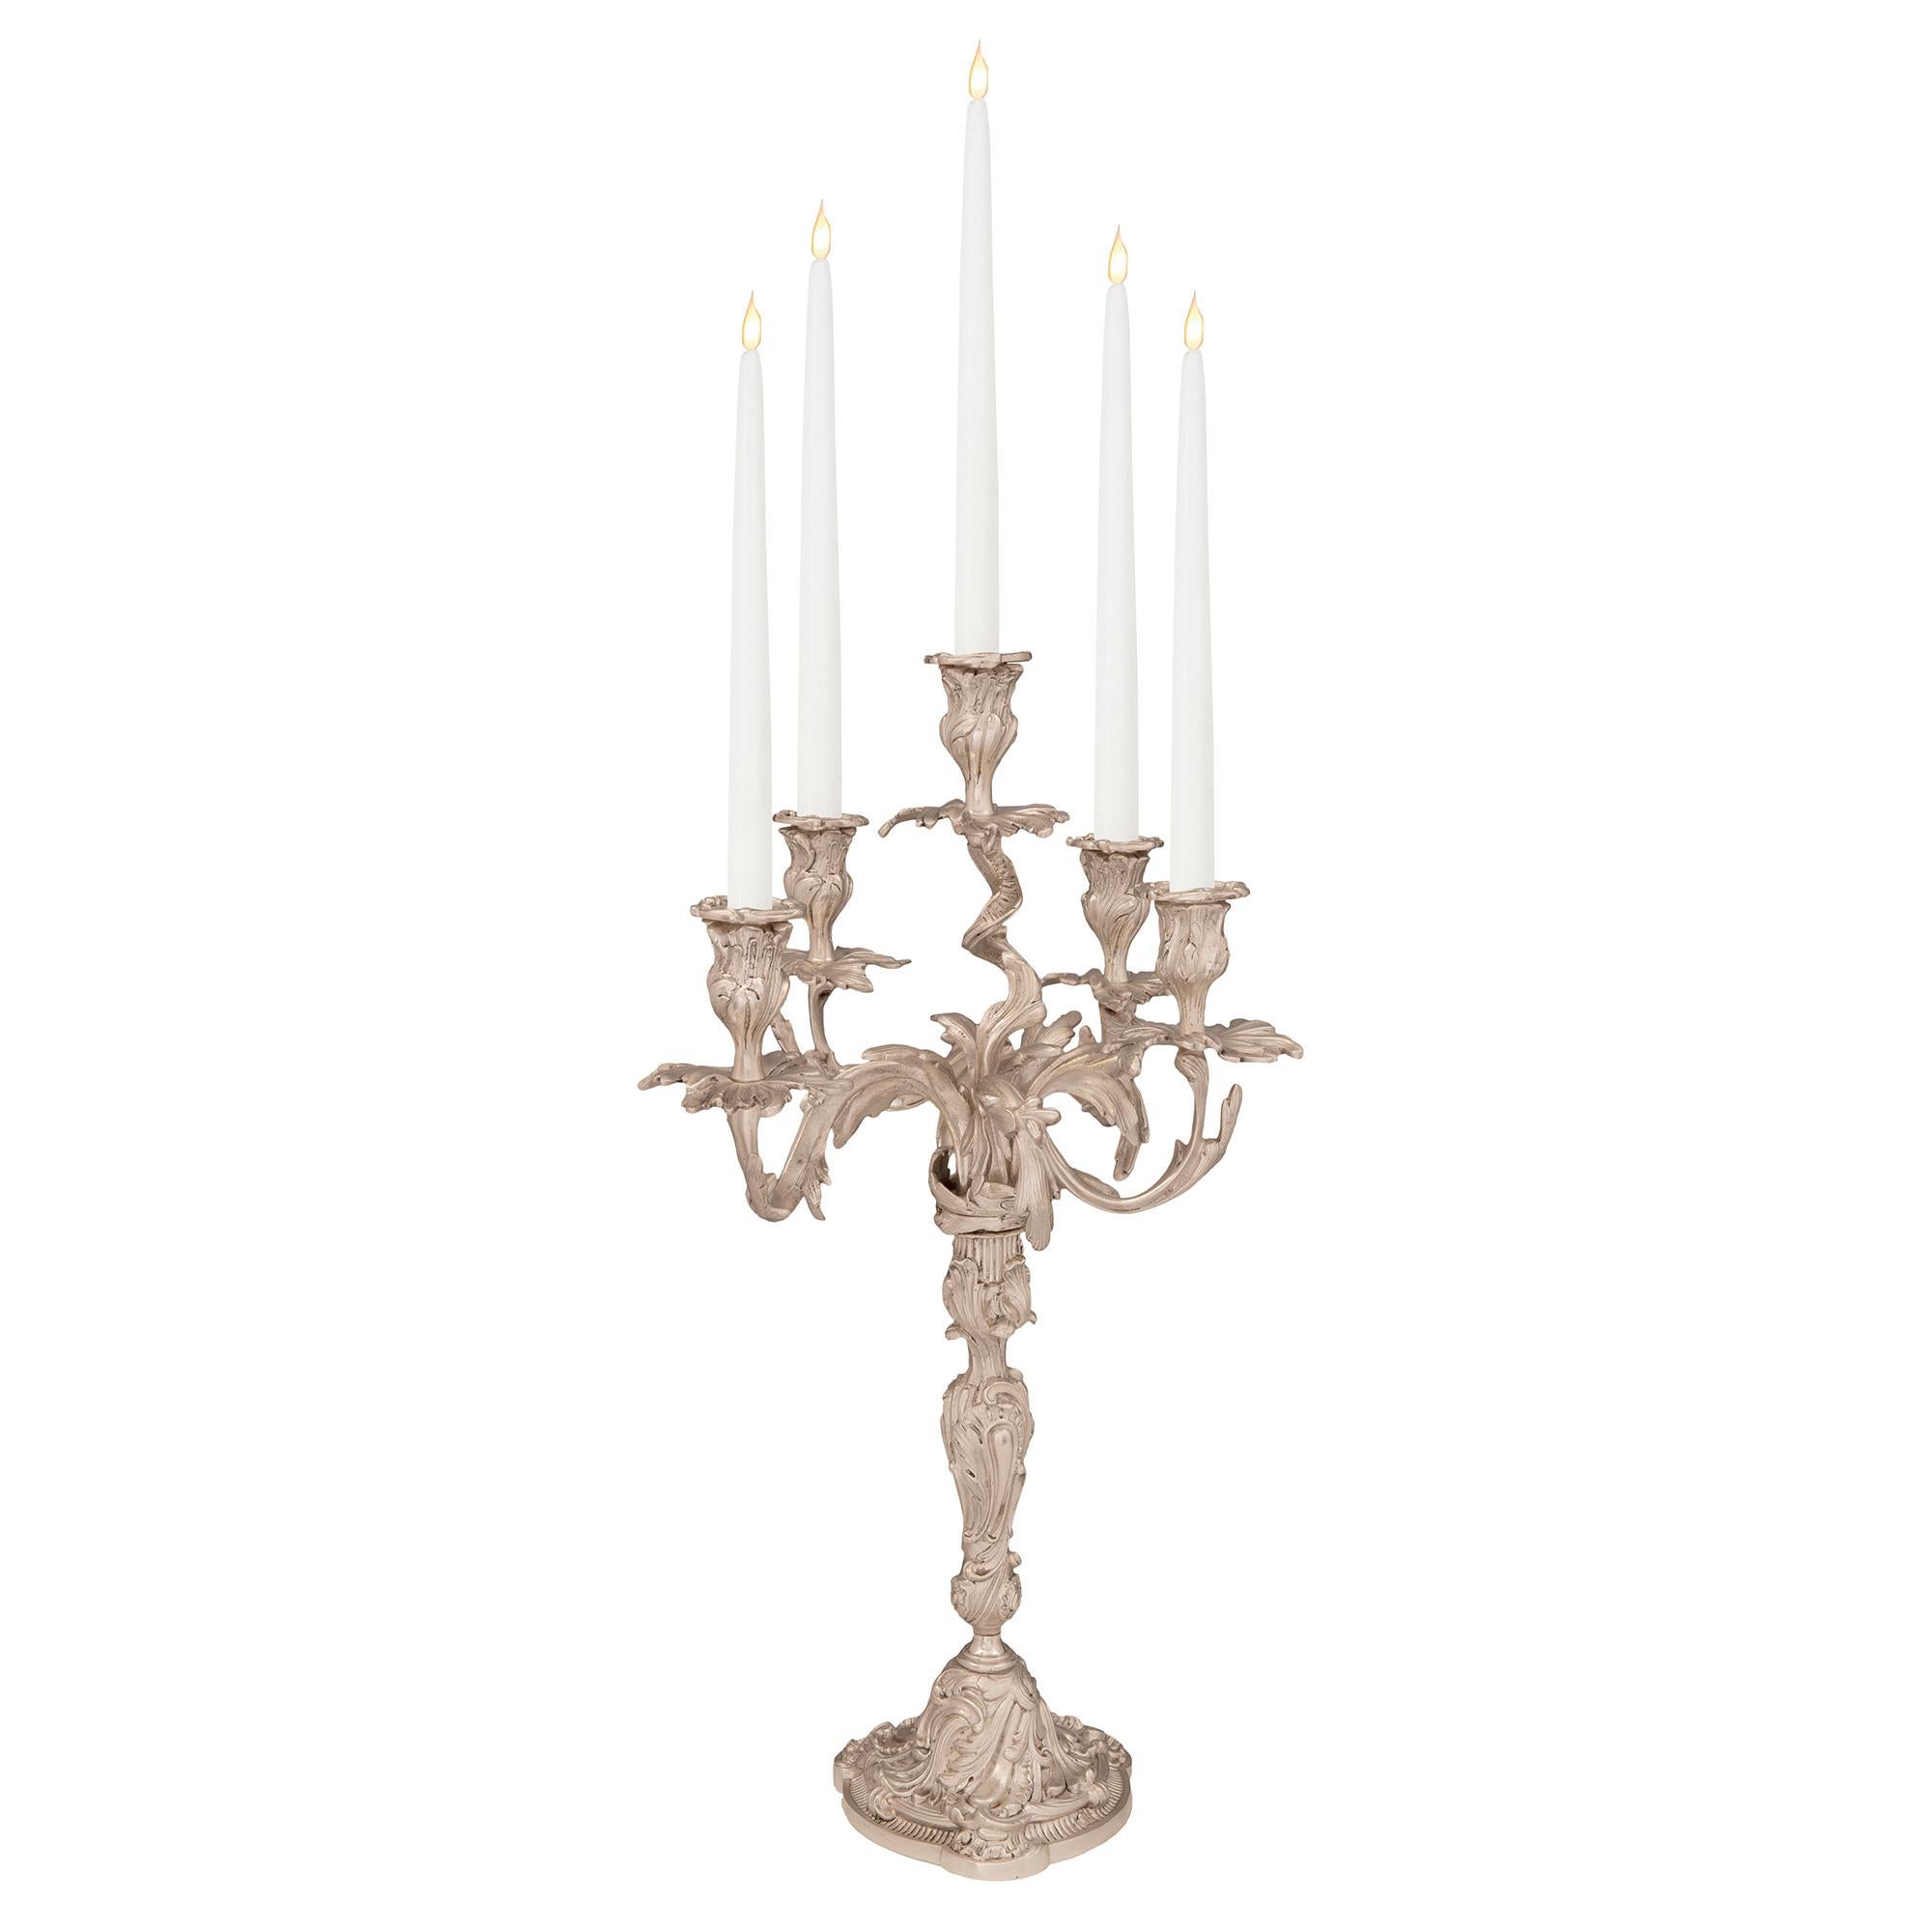 Silvered Pair of French Mid-19th Century Louis XV Style Bronze Five-Arm Candelabras For Sale